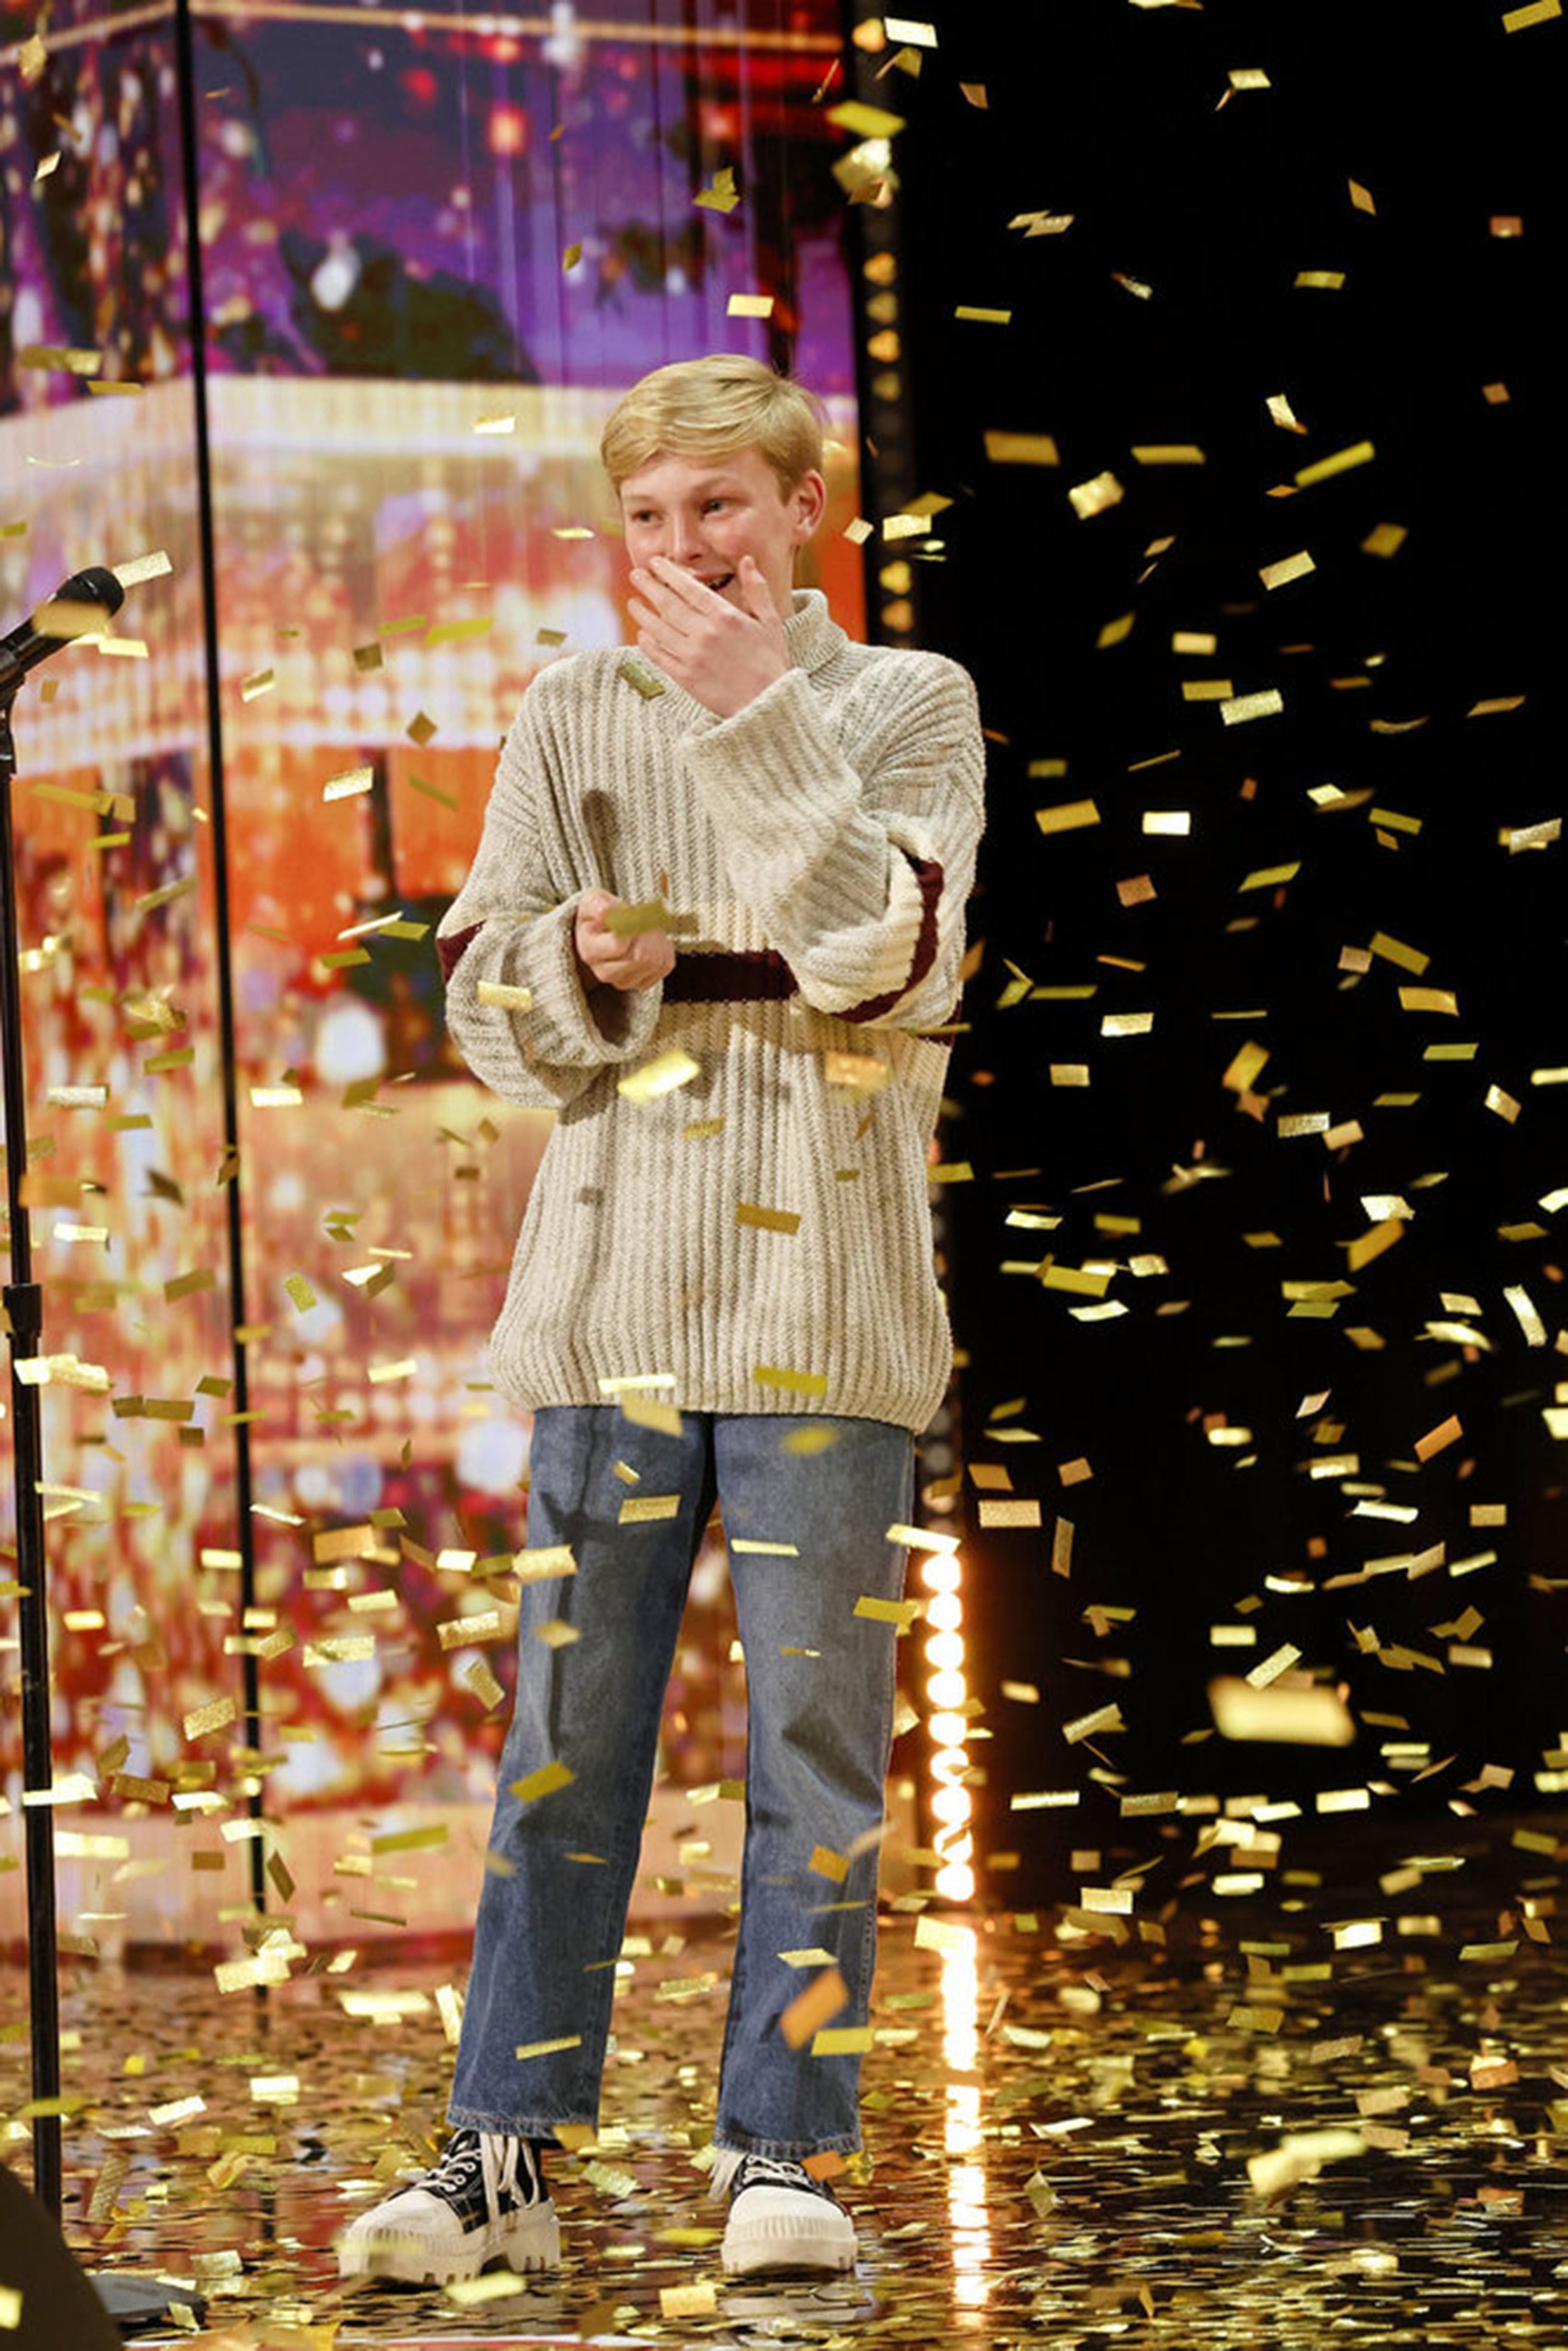 Behind the scenes of 14-year-old Reid Wilson's golden moment on 'America's Got Talent'